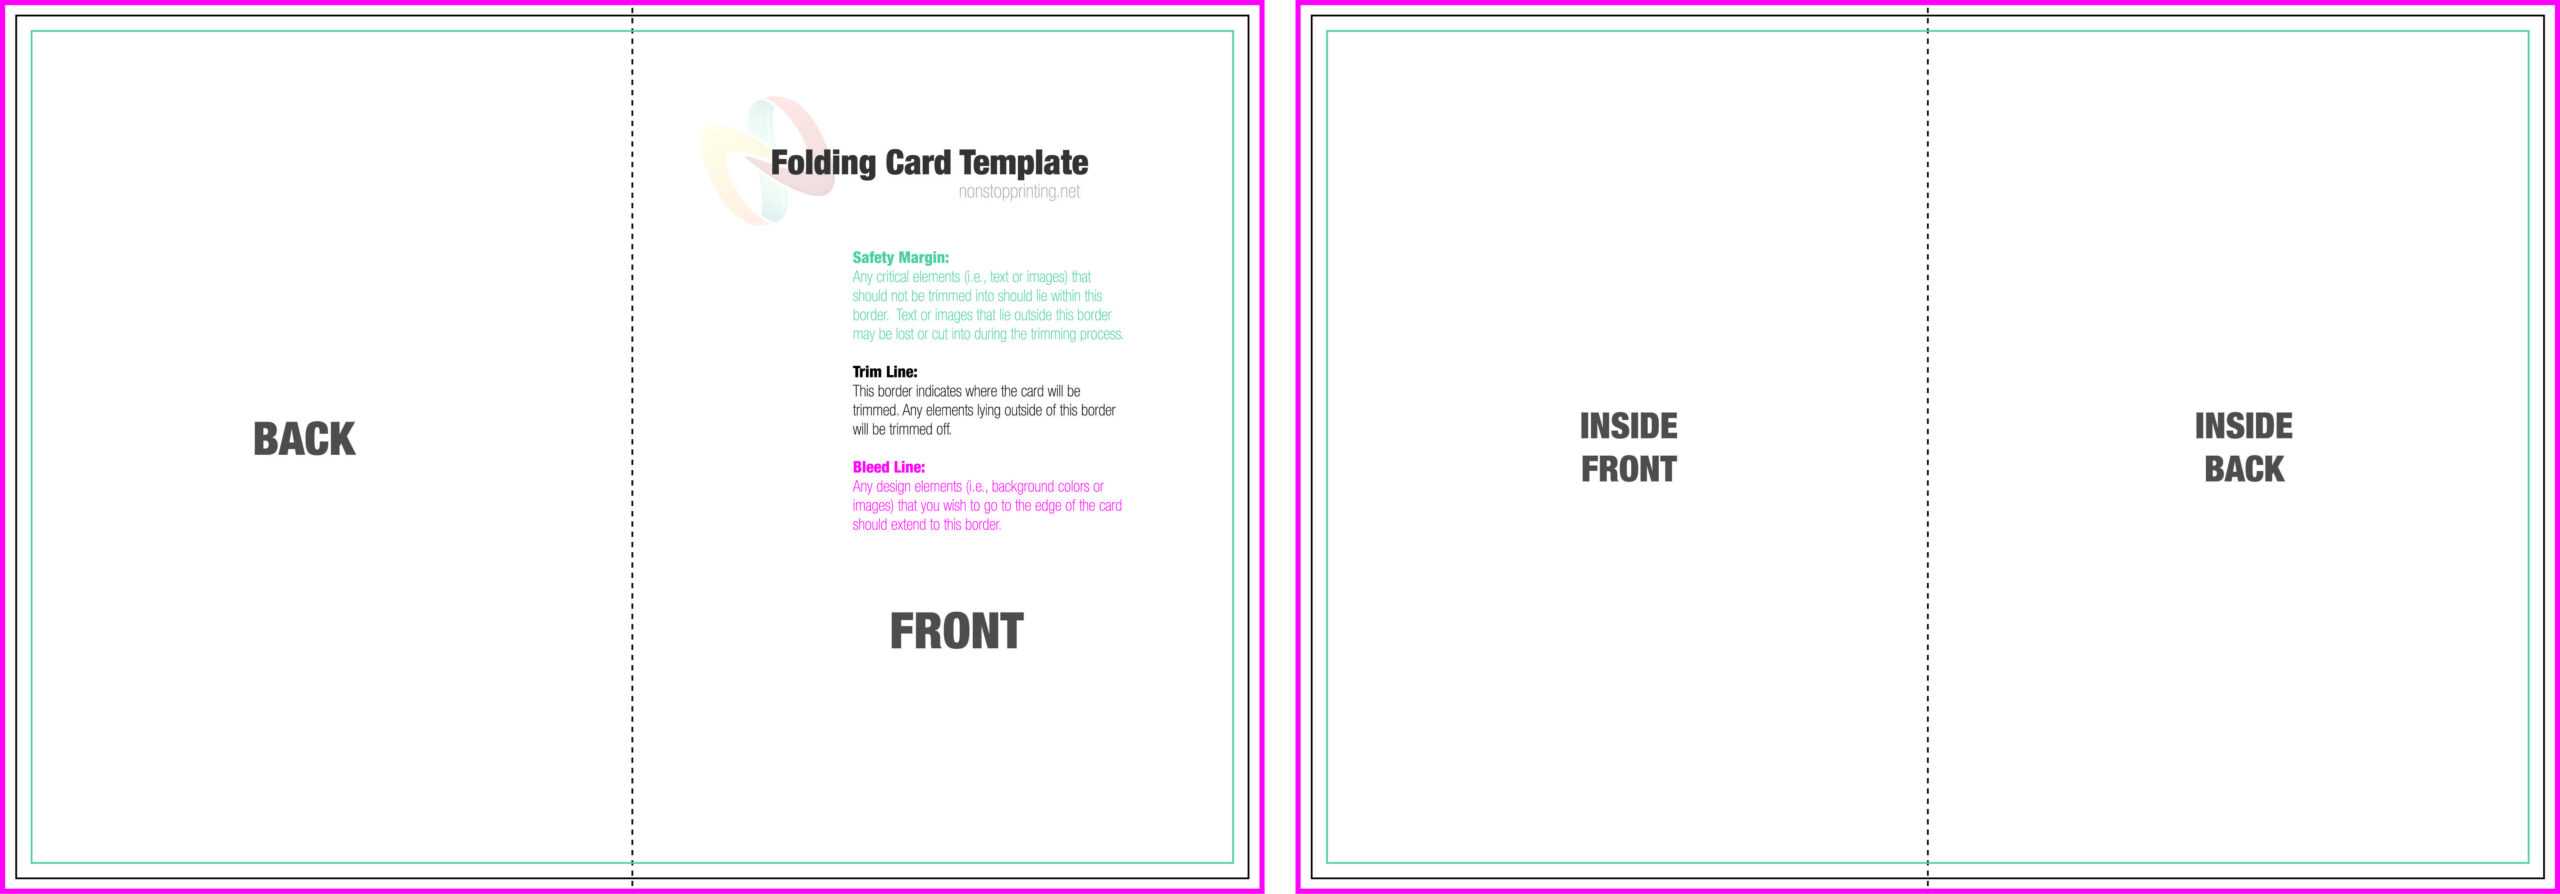 39 Online Folding Card Template For Word Now With Folding Within Foldable Card Template Word